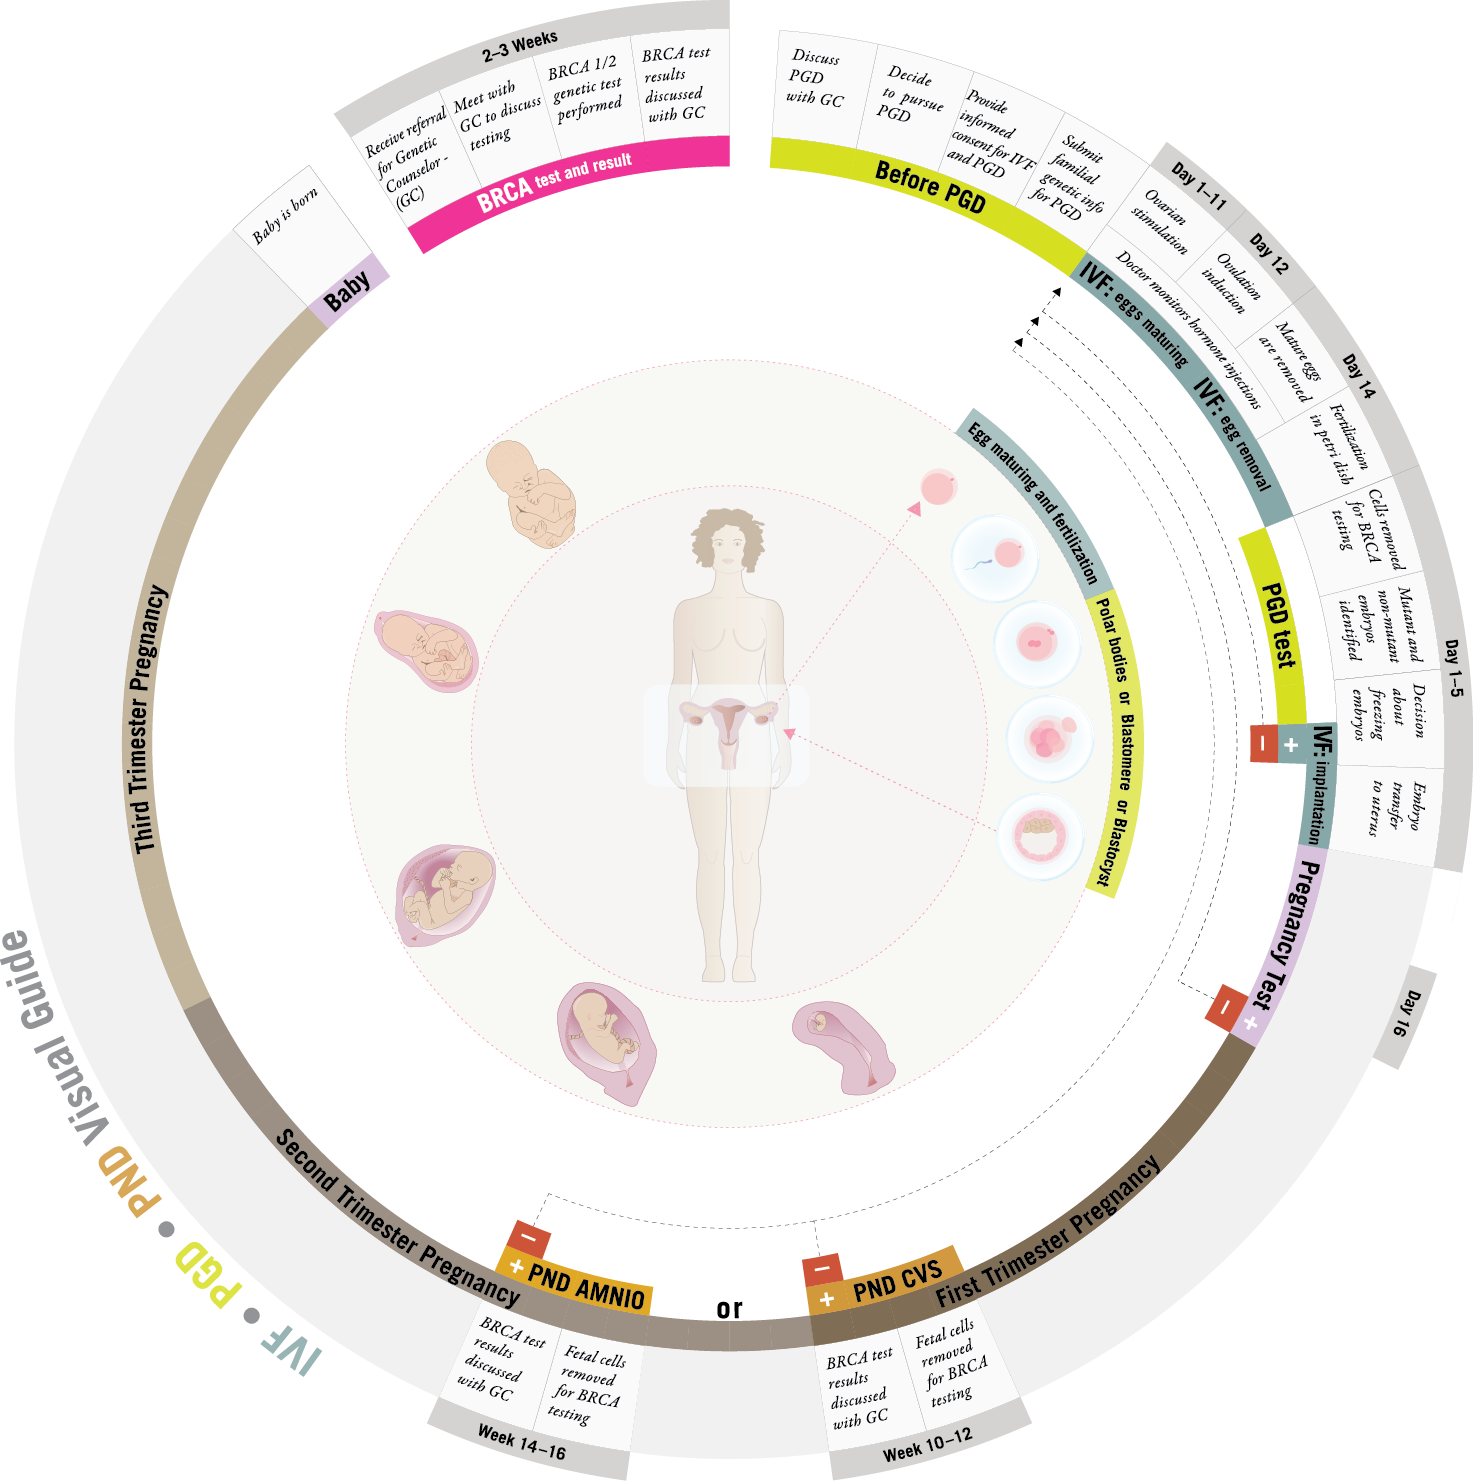 visual guide to BRCA